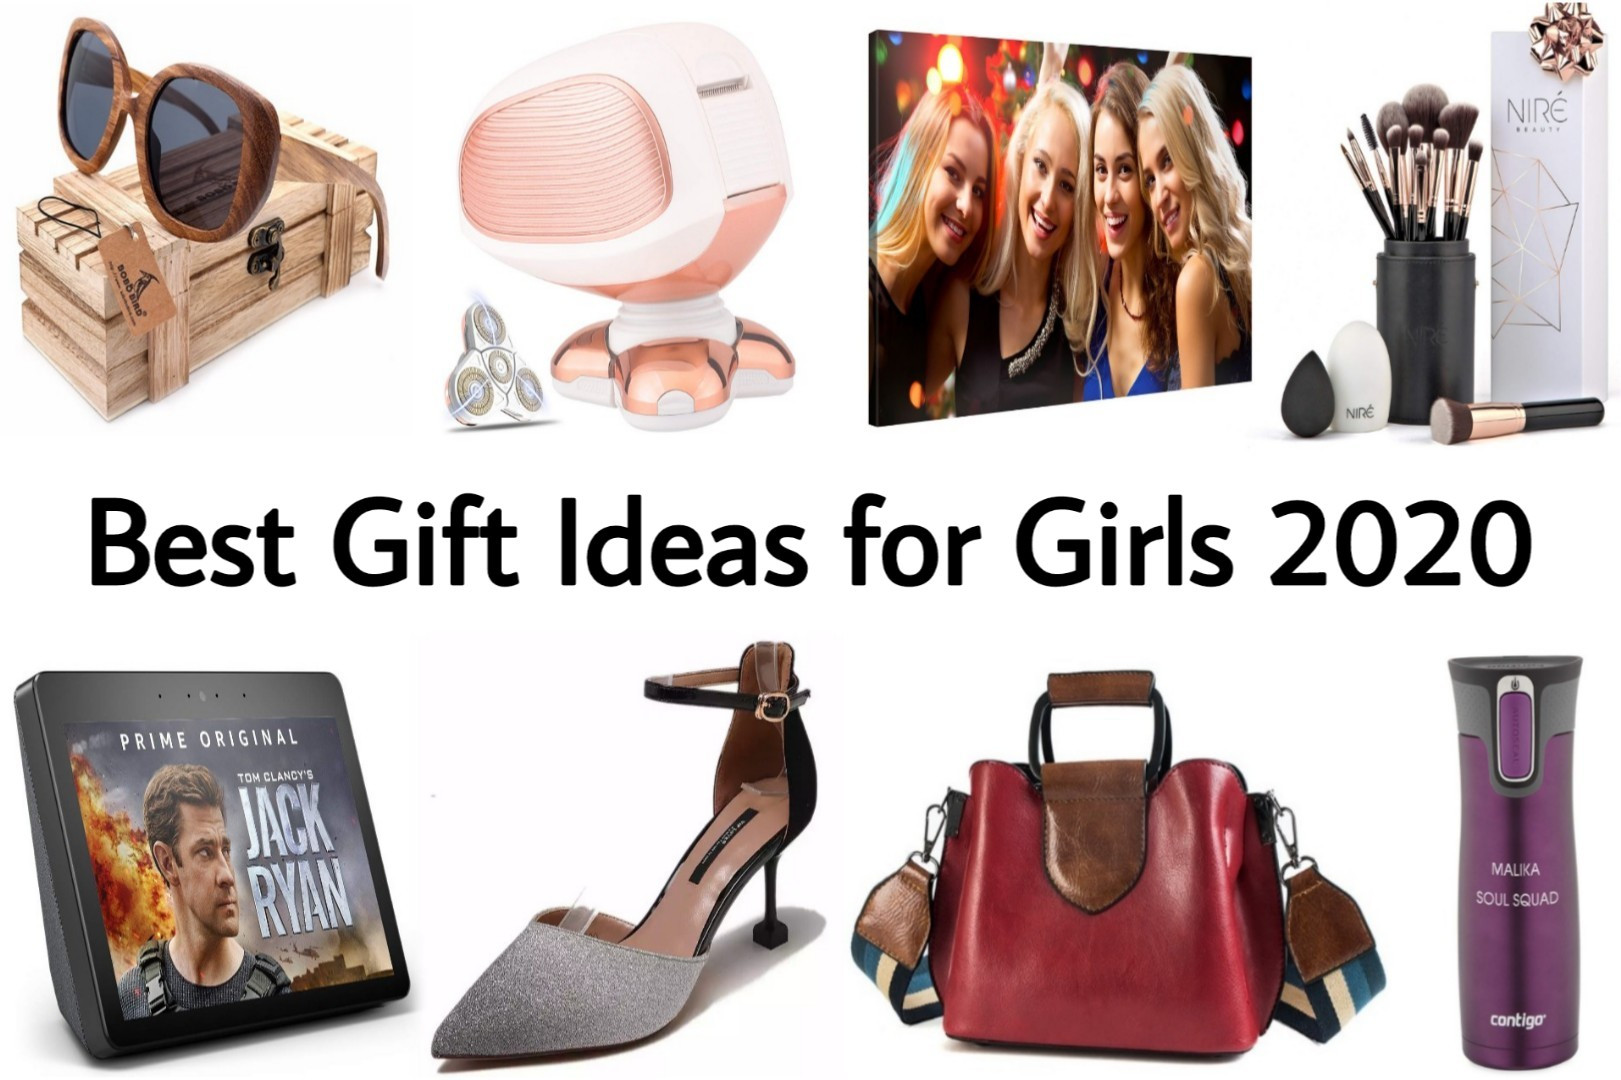 Birthday Gift Ideas For A Girlfriend
 Best Christmas Gifts For Girlfriend 2020